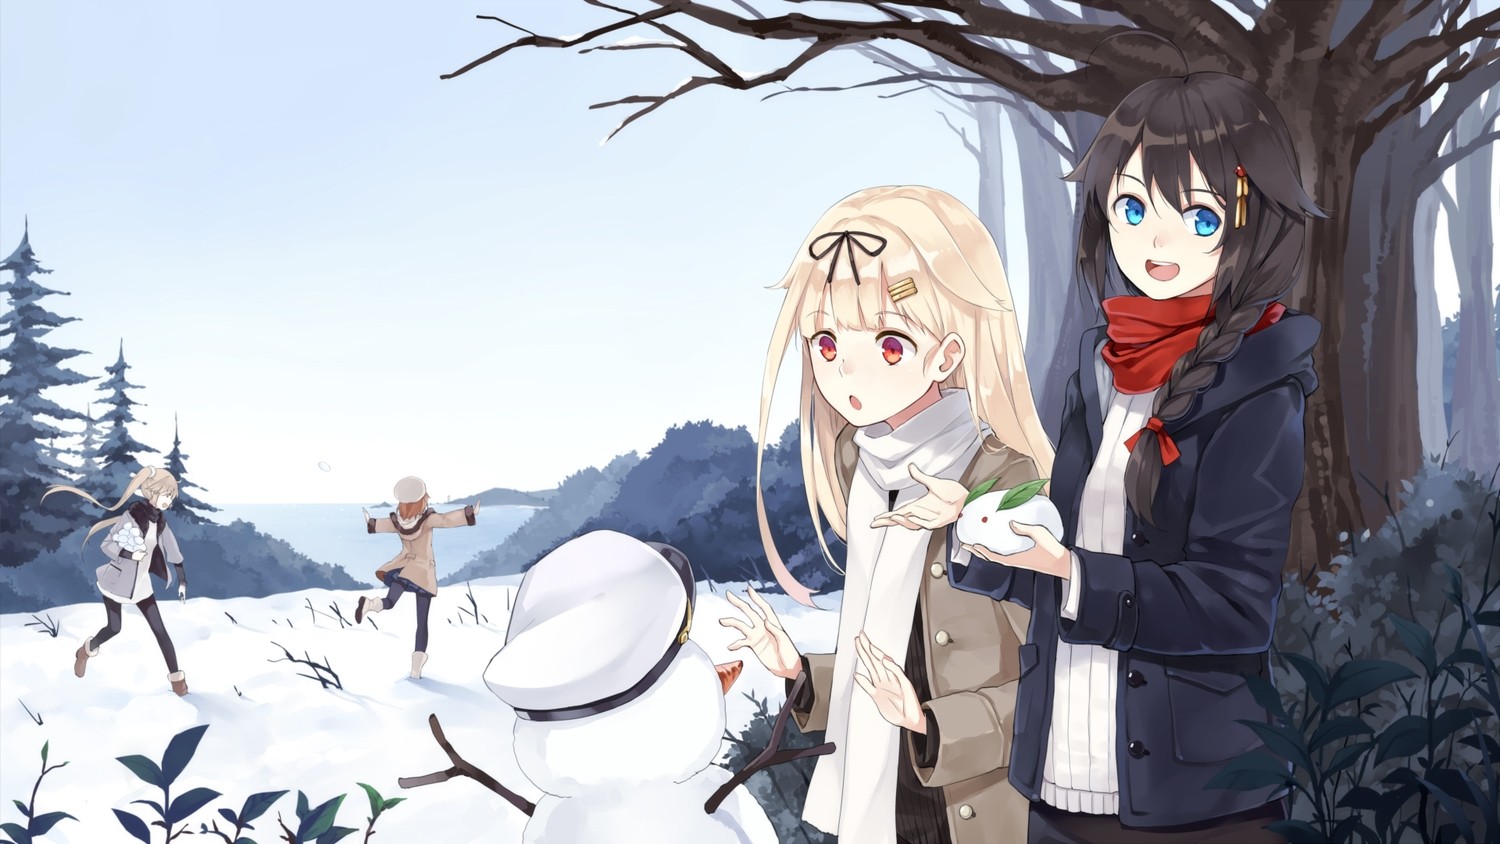 Anime 1500x844 Kantai Collection Murasame (KanColle) Shigure (KanColle) Shiratsuyu (KanColle) Yuudachi (KanColle) snow group of women winter cold outdoors snowman trees open mouth landscape